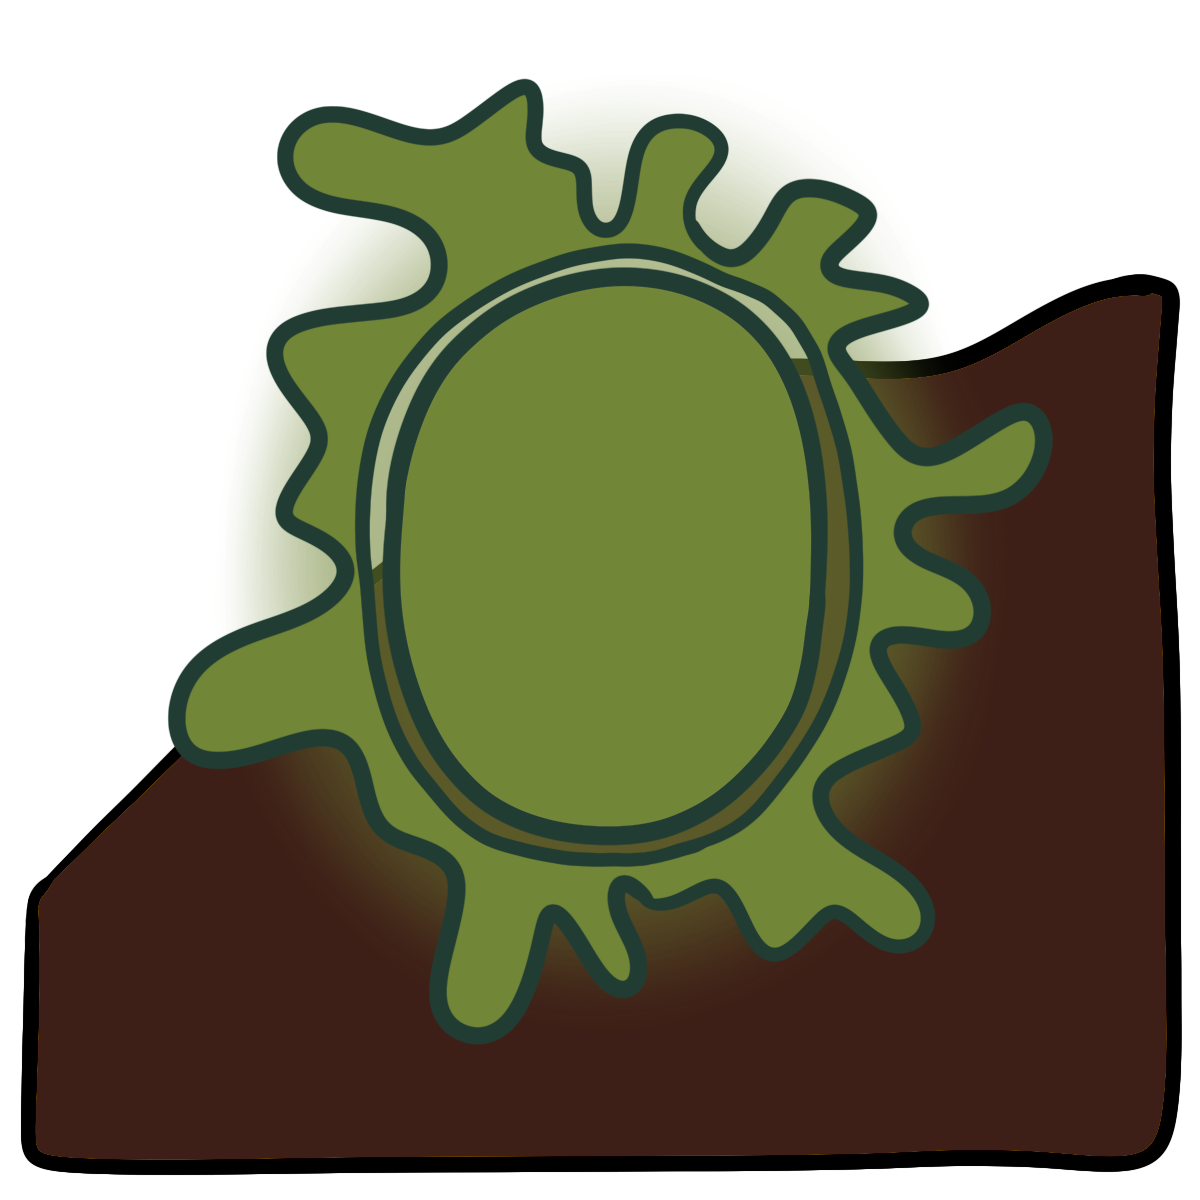 A yellowy green oval with a splatting blob shape encircling it. Curved dark brown skin fills the bottom half of the background.